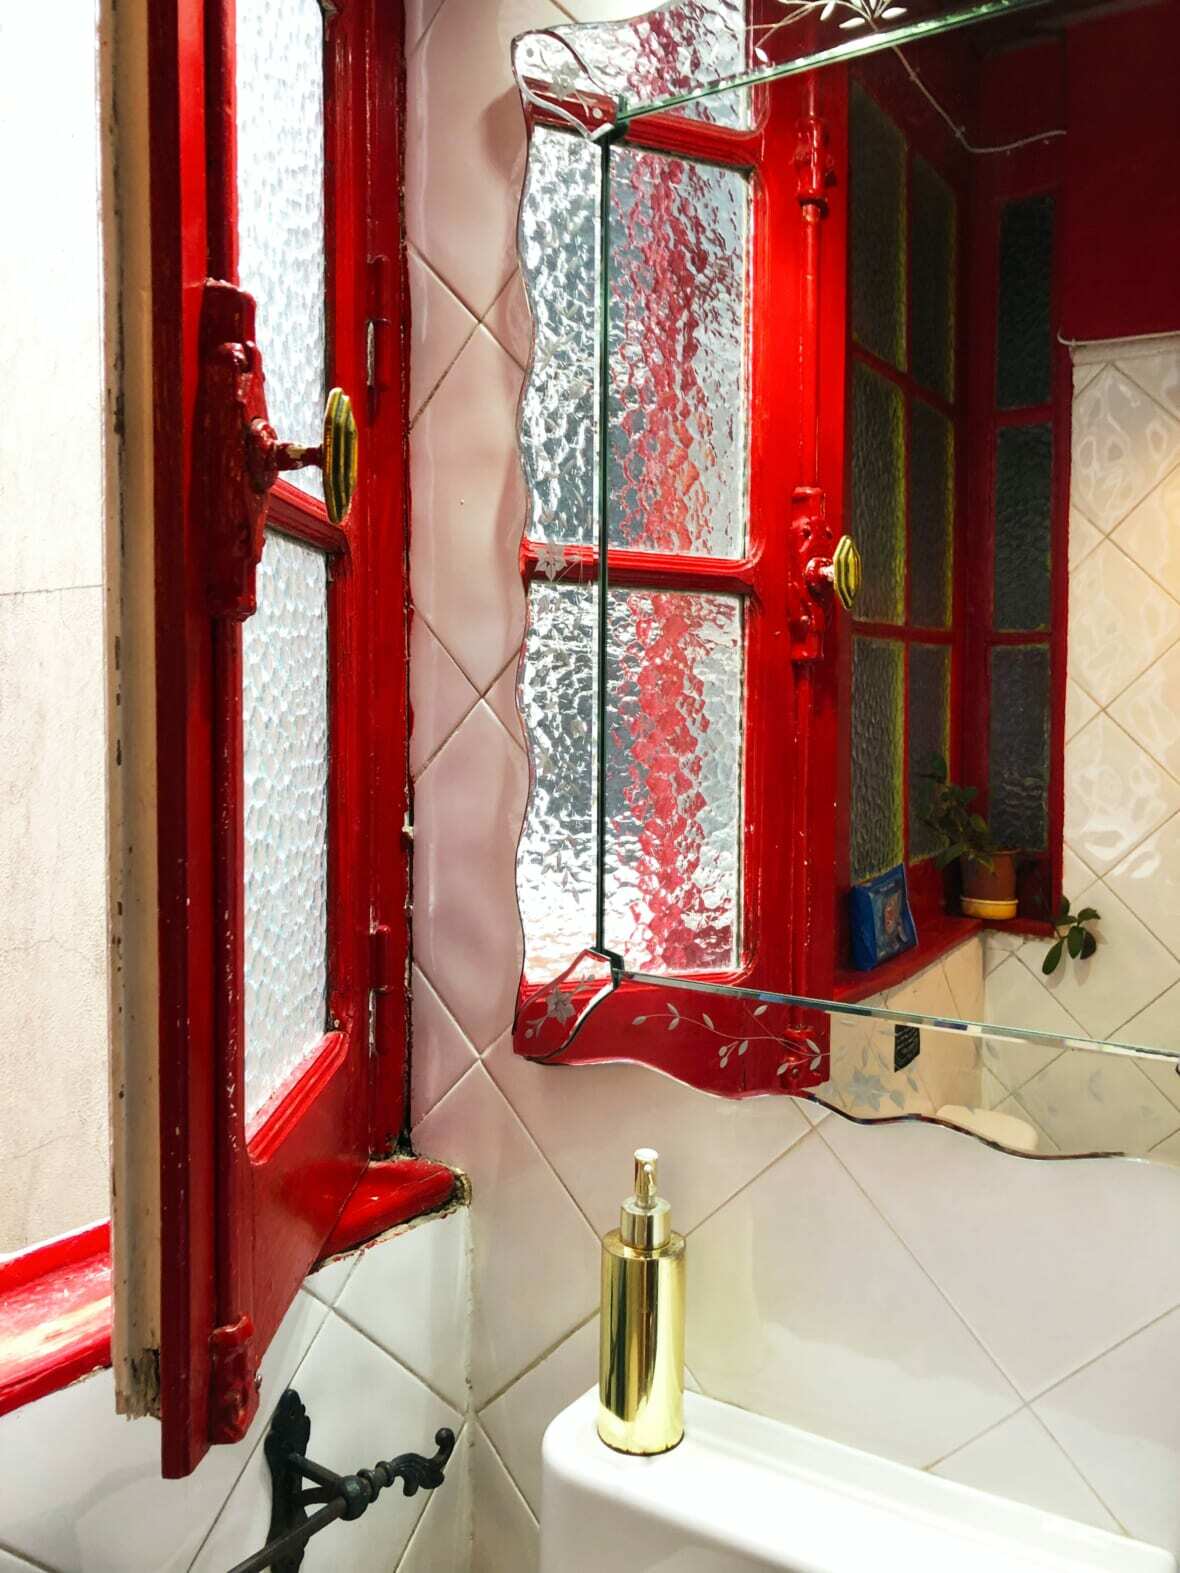 Which paint color best suits your bathroom? Red